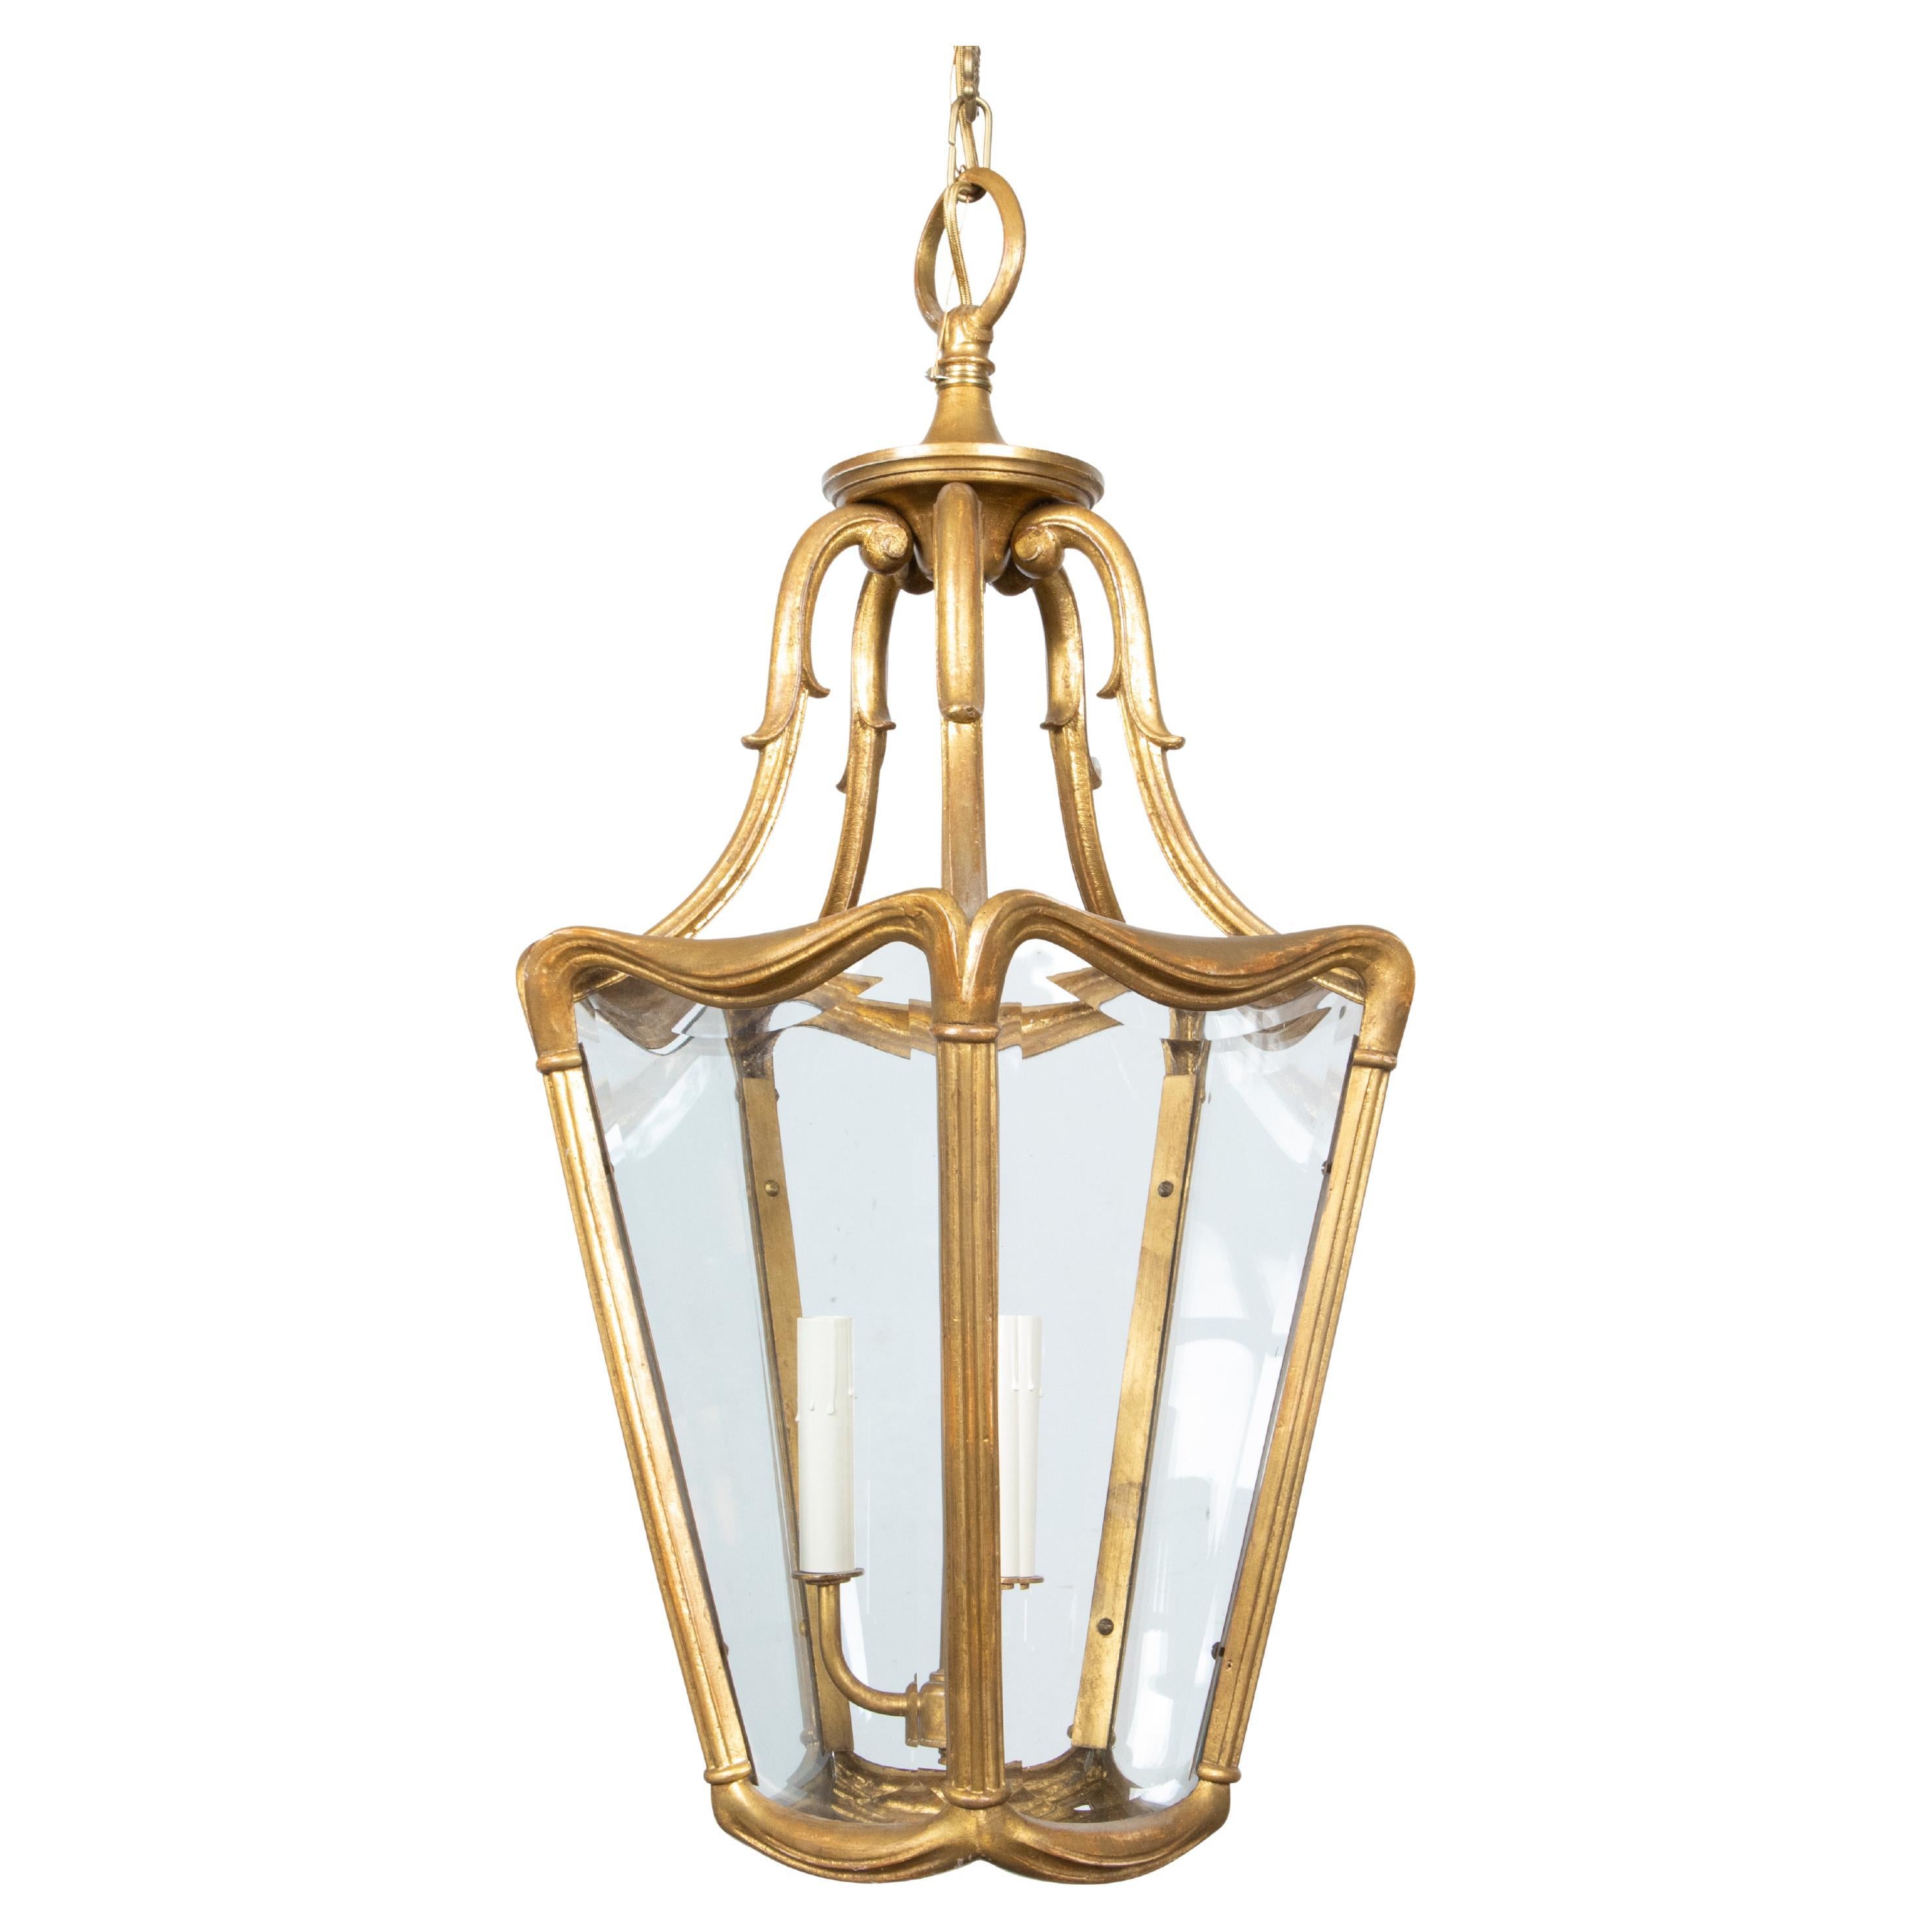 Art Nouveau Style Gilt Metal Three-Light Lantern with Subtle Scrolling Effects For Sale